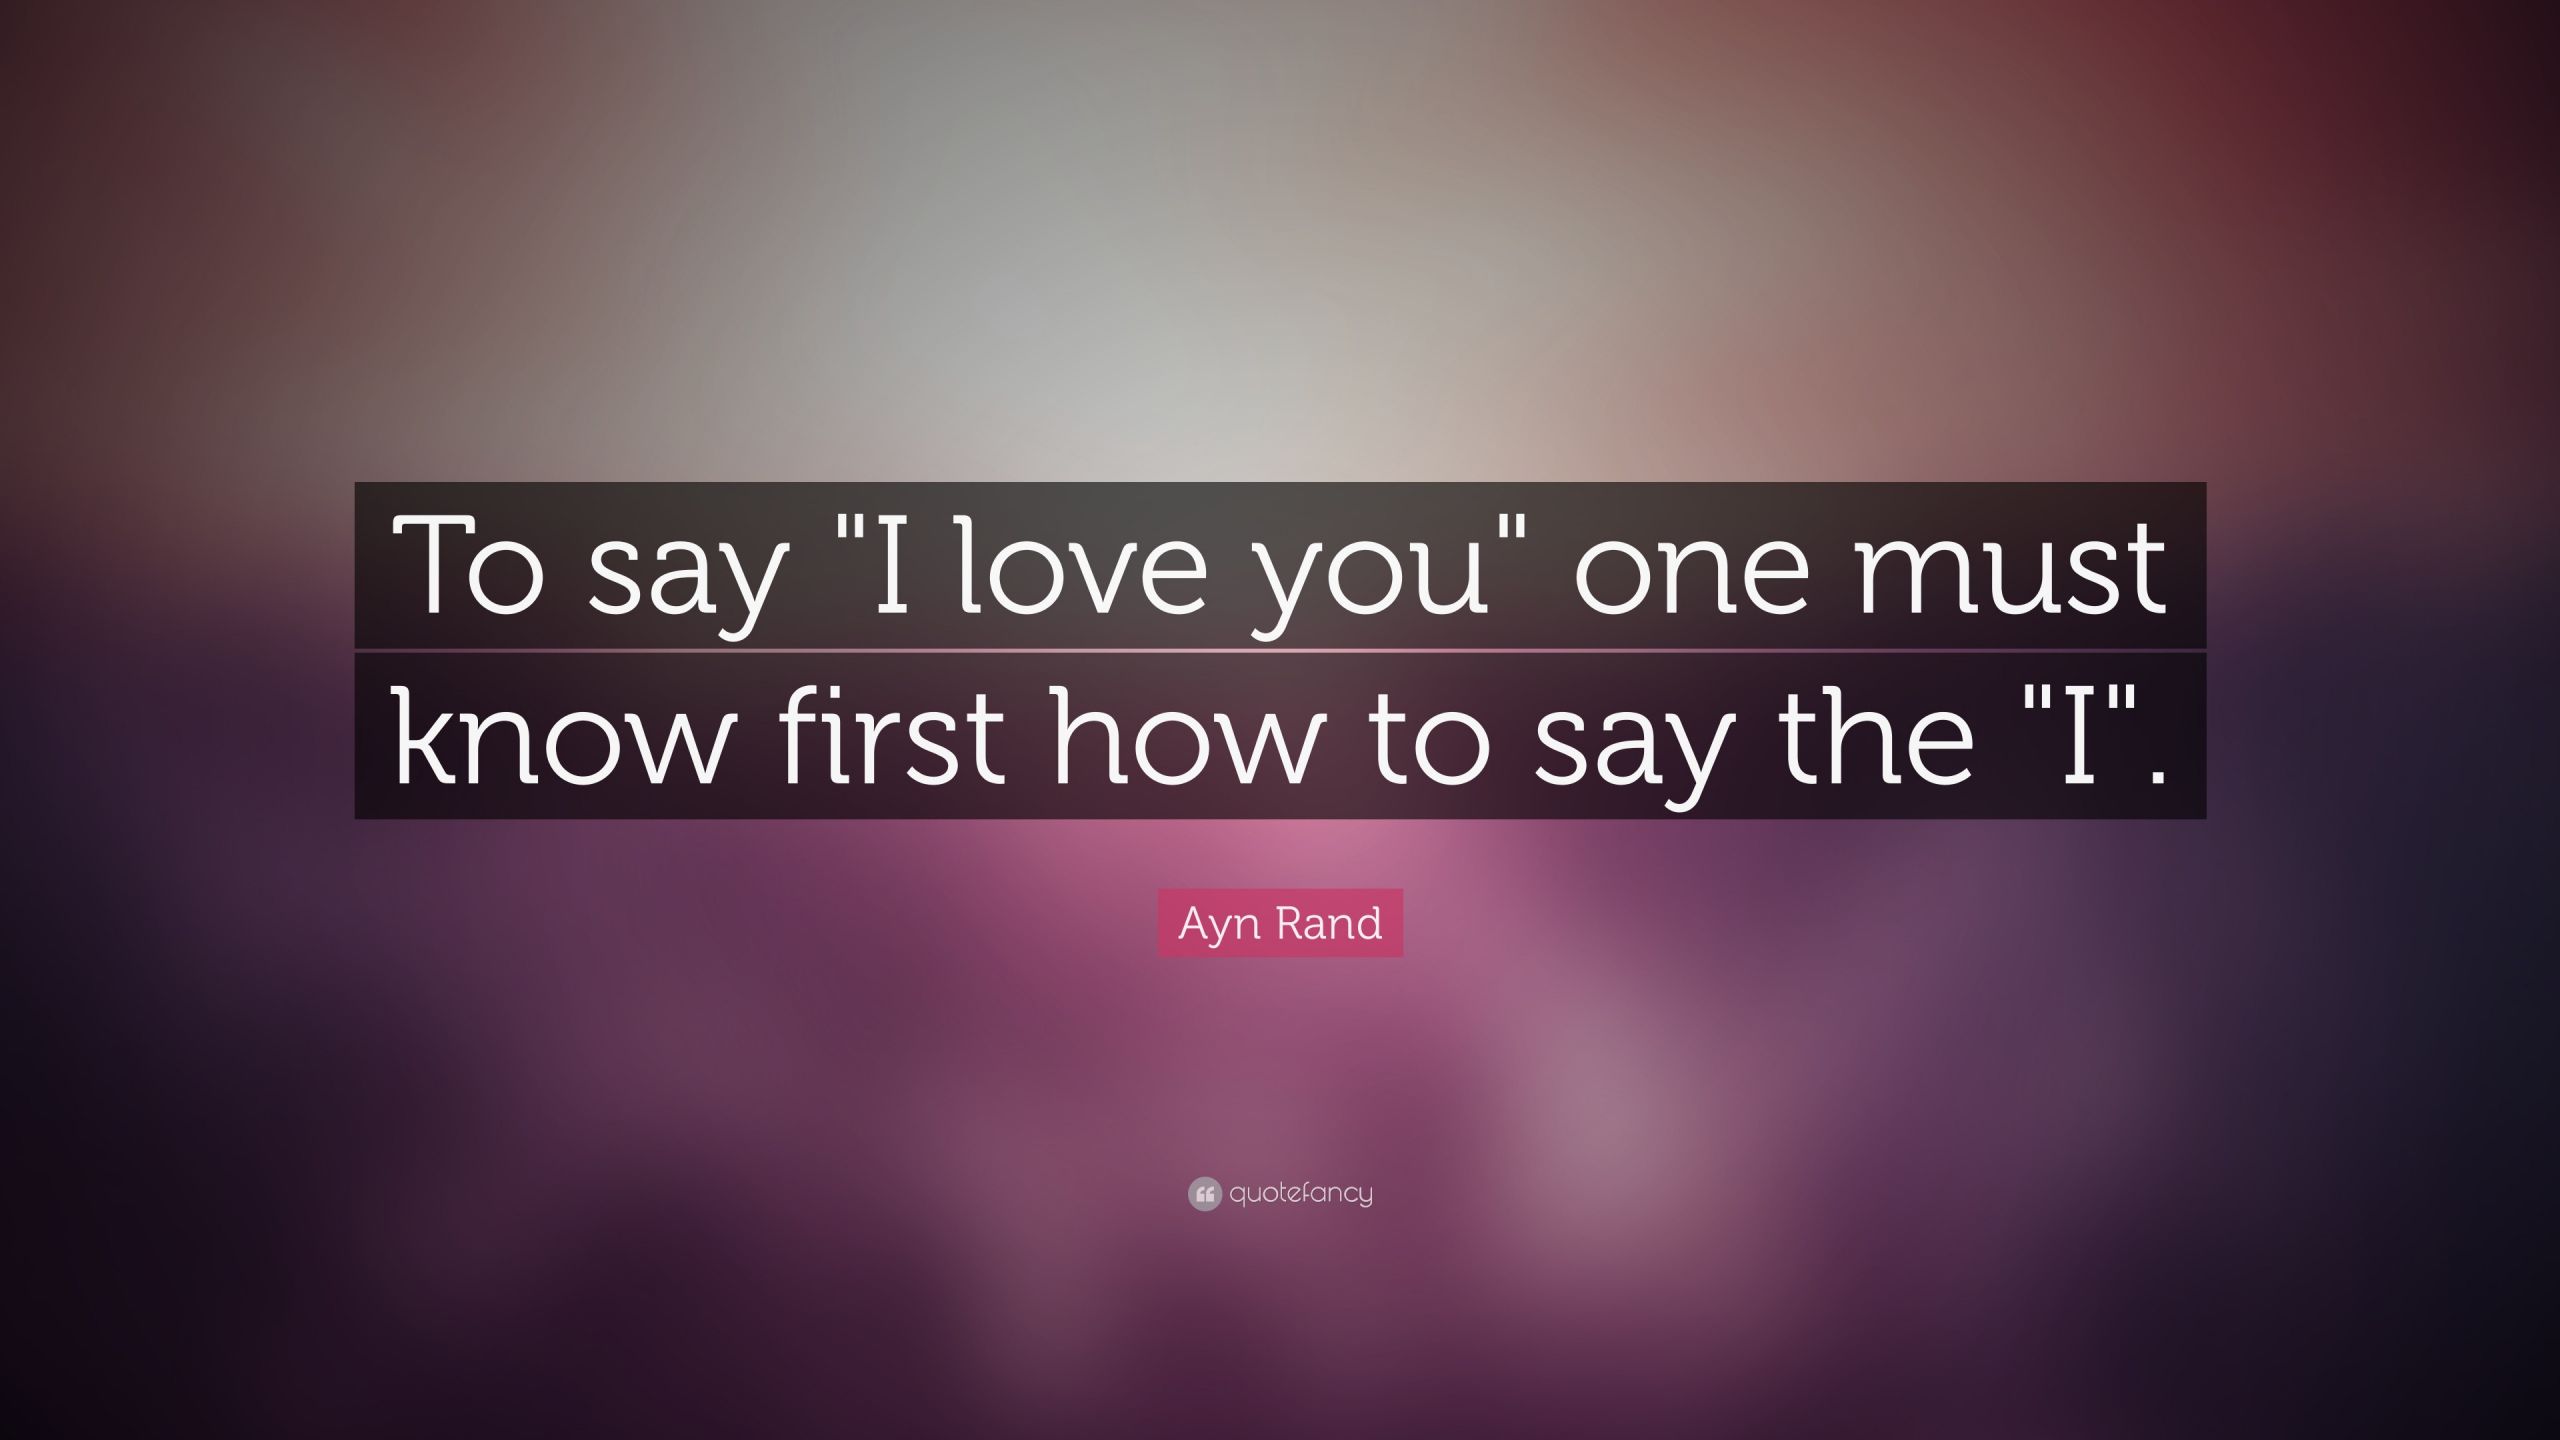 Ayn Rand Love Quotes
 Ayn Rand Quotes 100 wallpapers Quotefancy